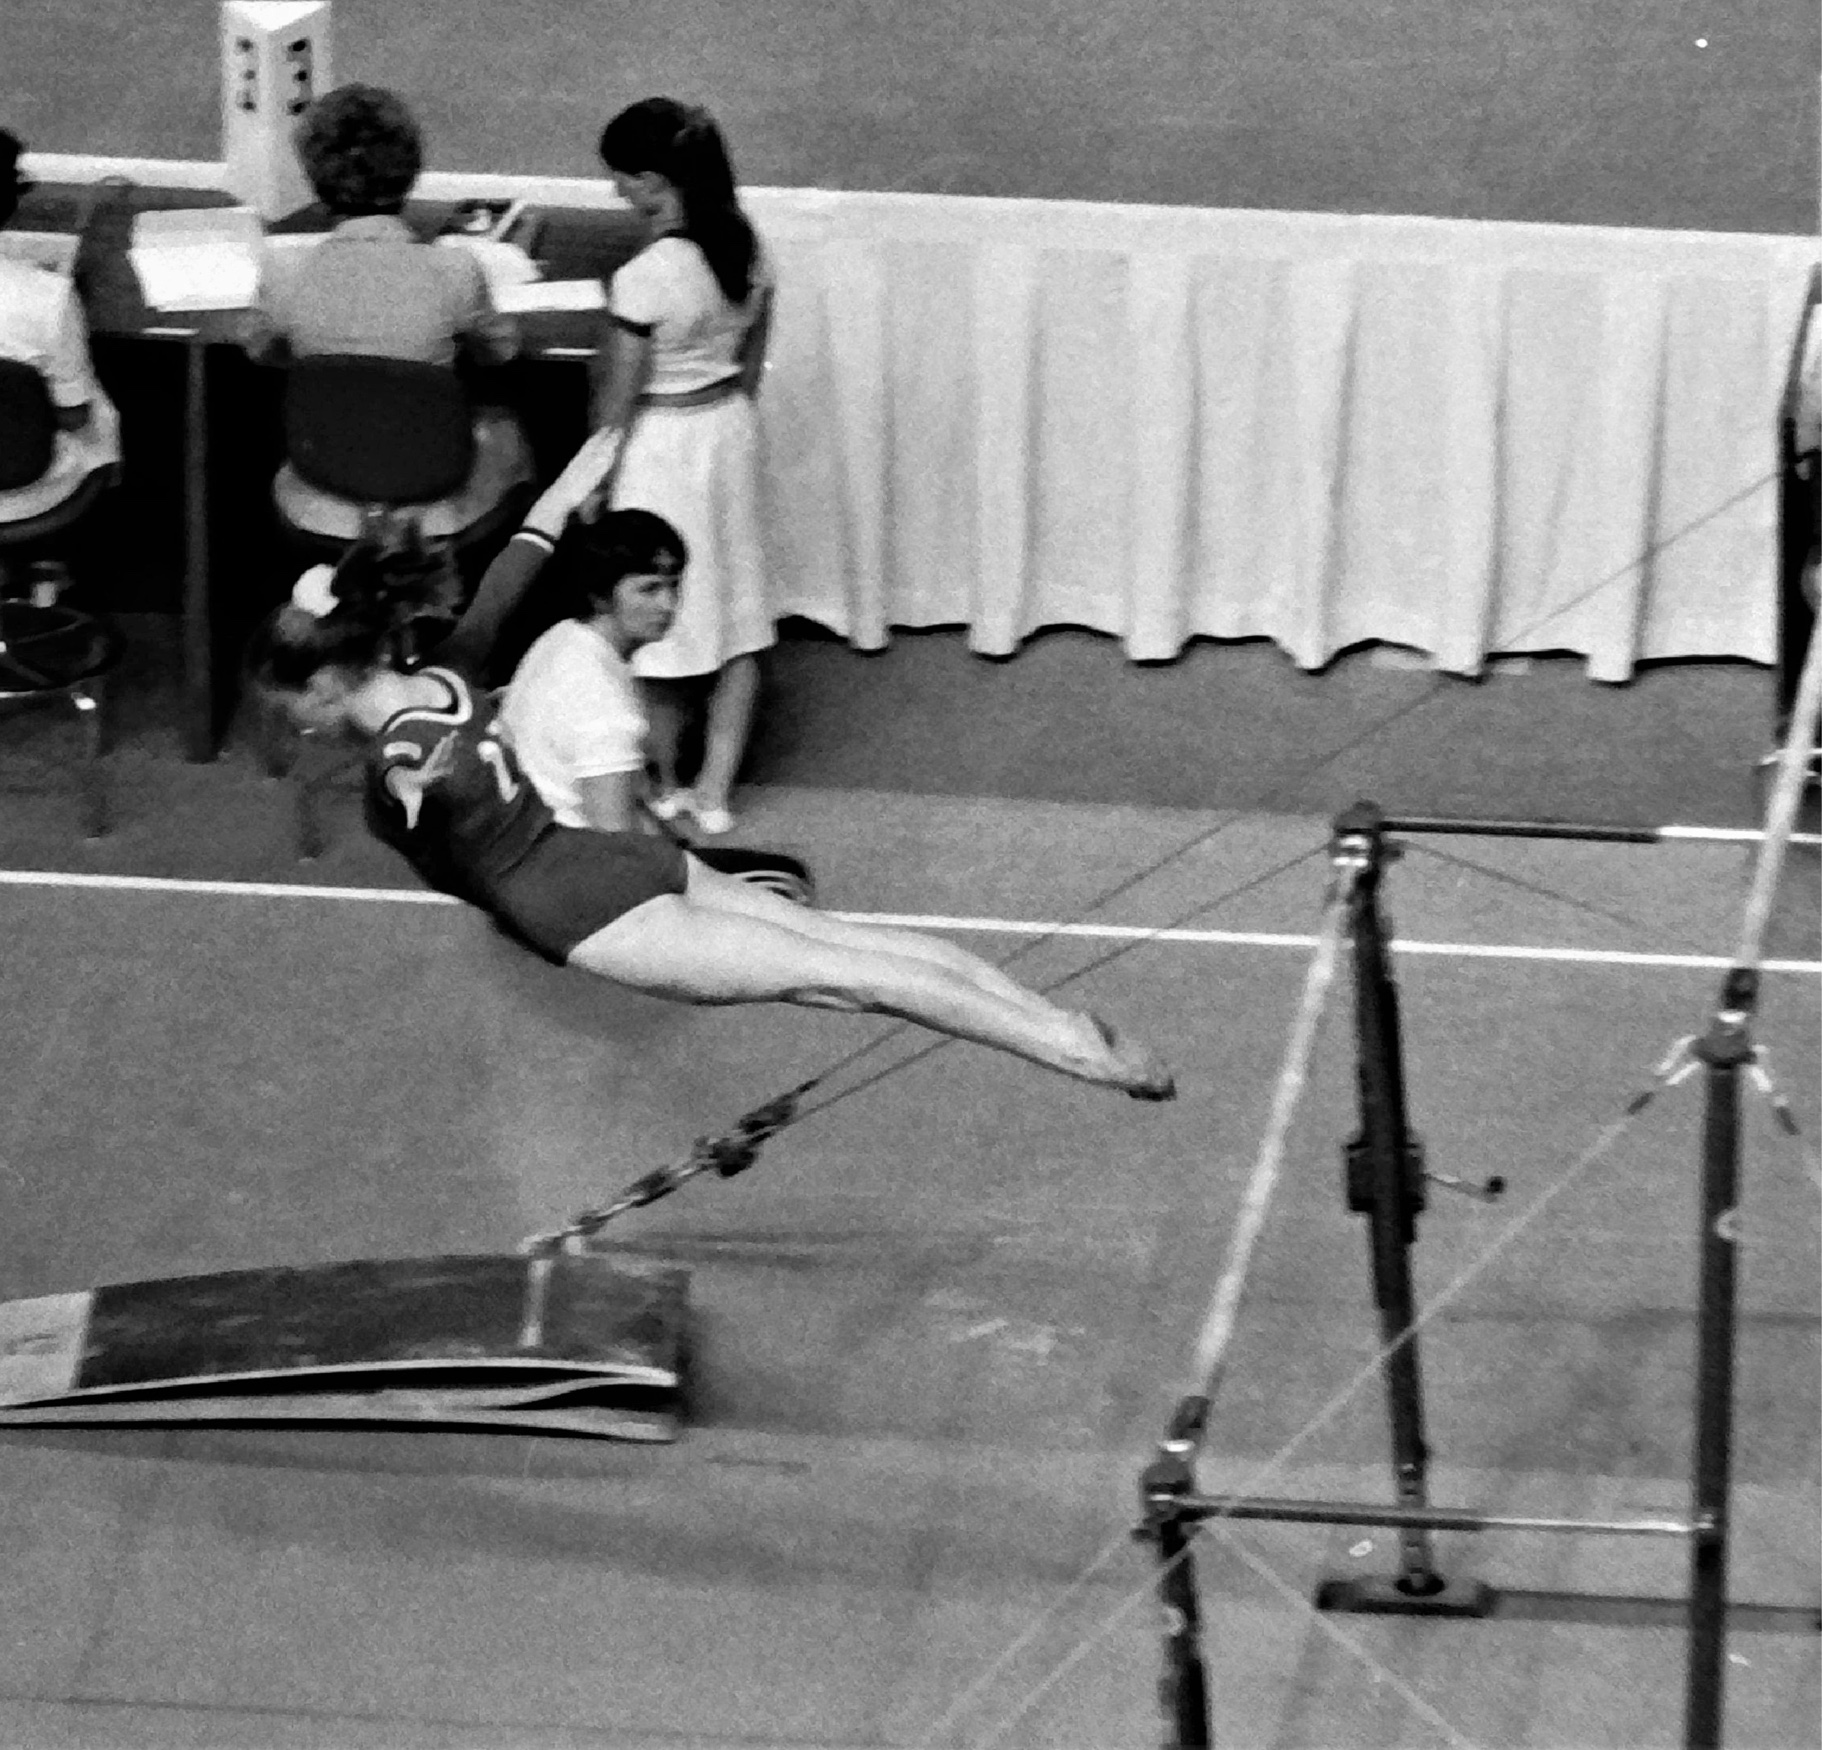 Barbara Slater competing on A Bars in Montreal in 1976